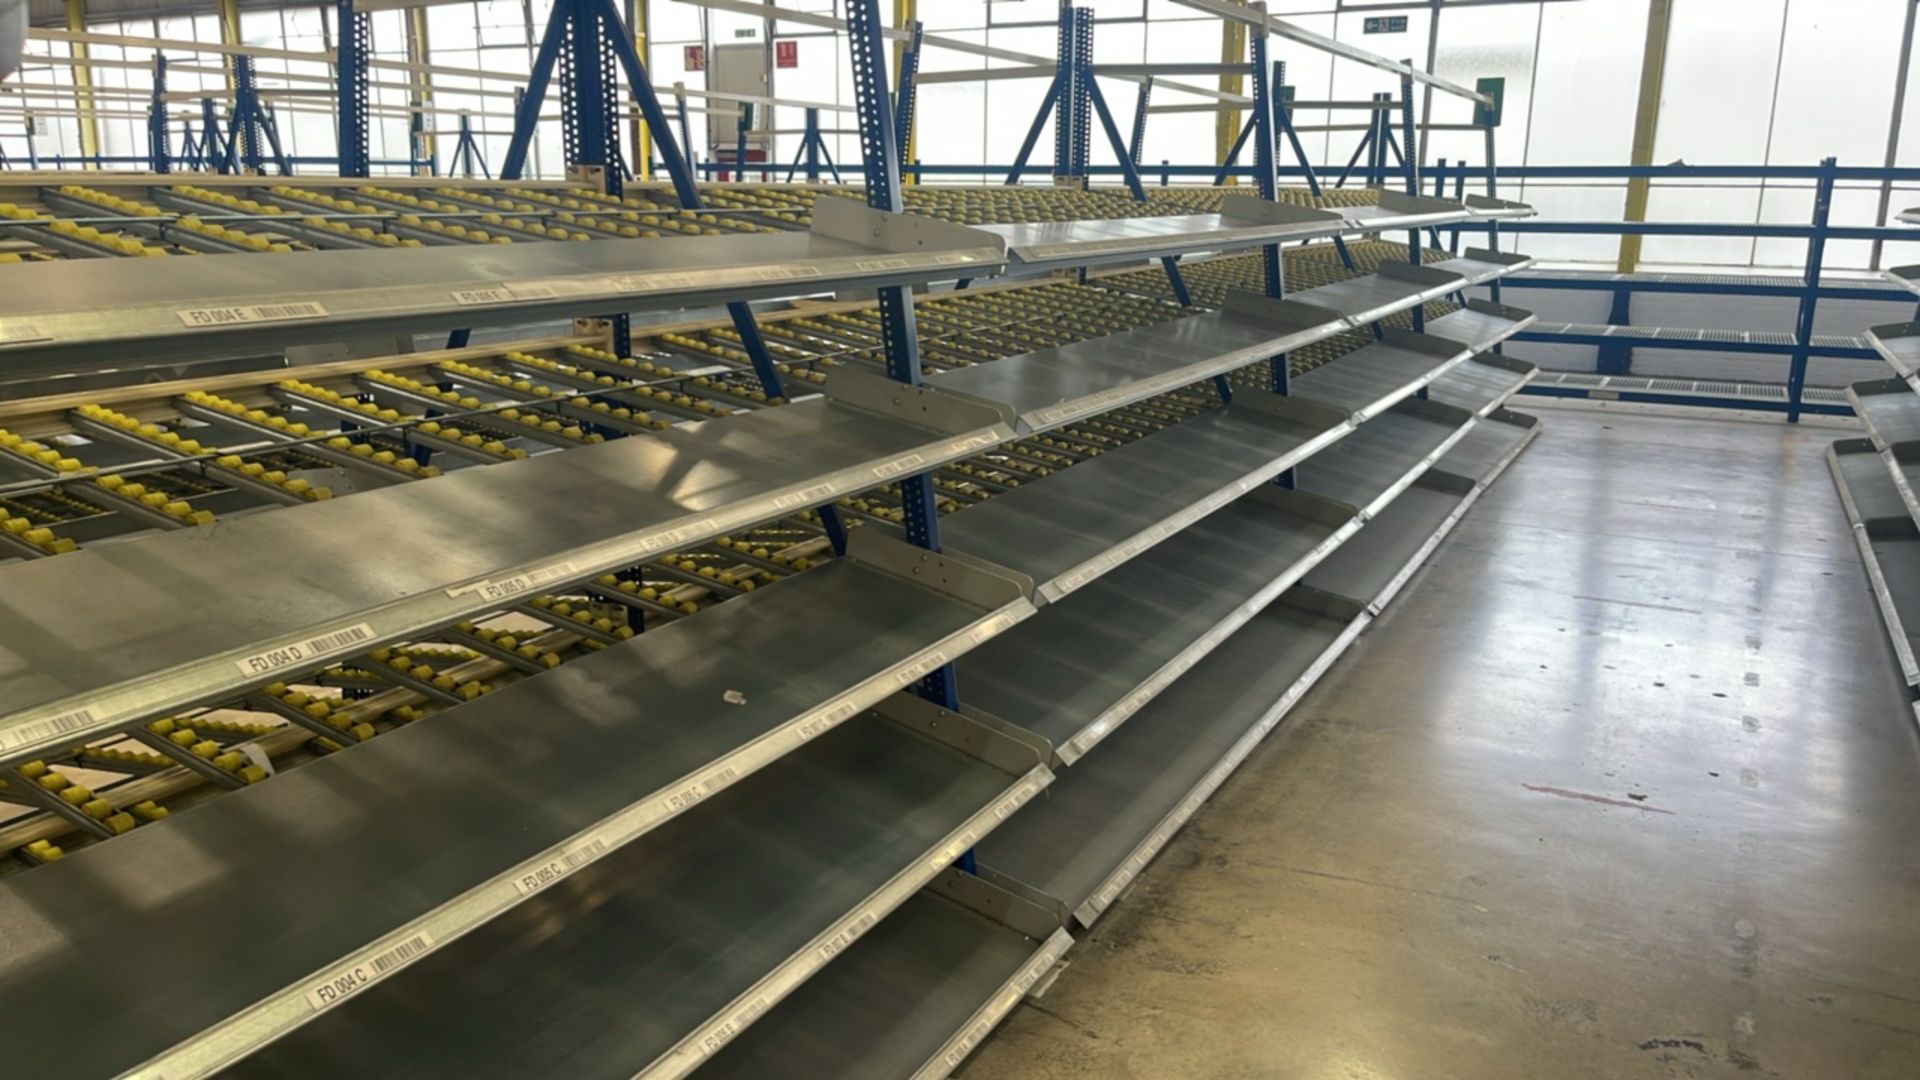 A Run Of 8 Bays Of Back To Back Flow Racks - Image 10 of 11